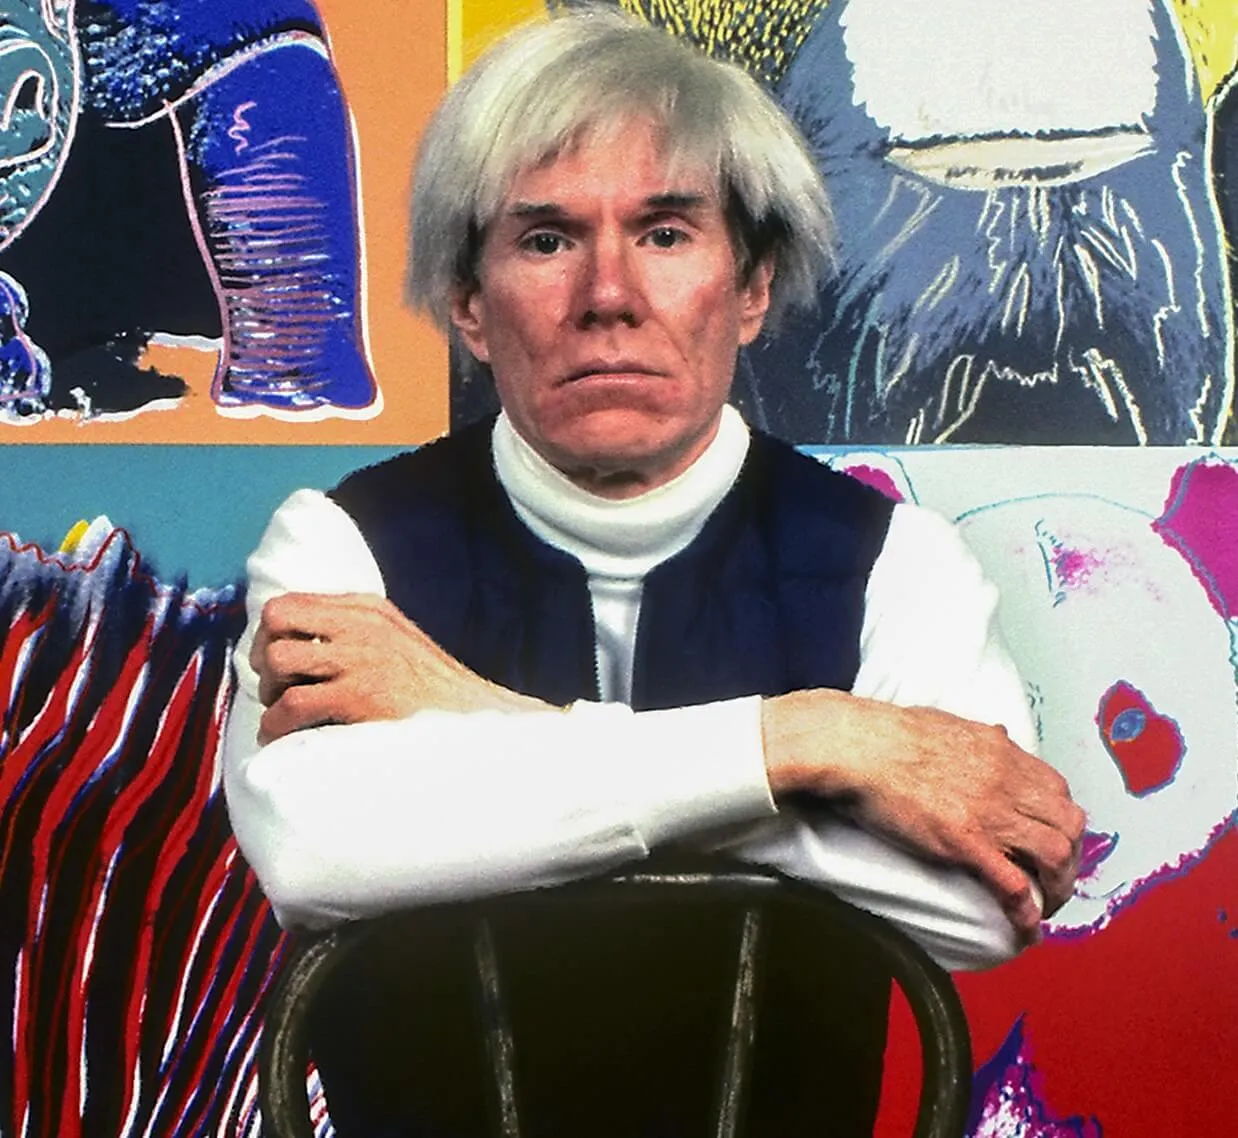 Andy Warhol with his arms folded